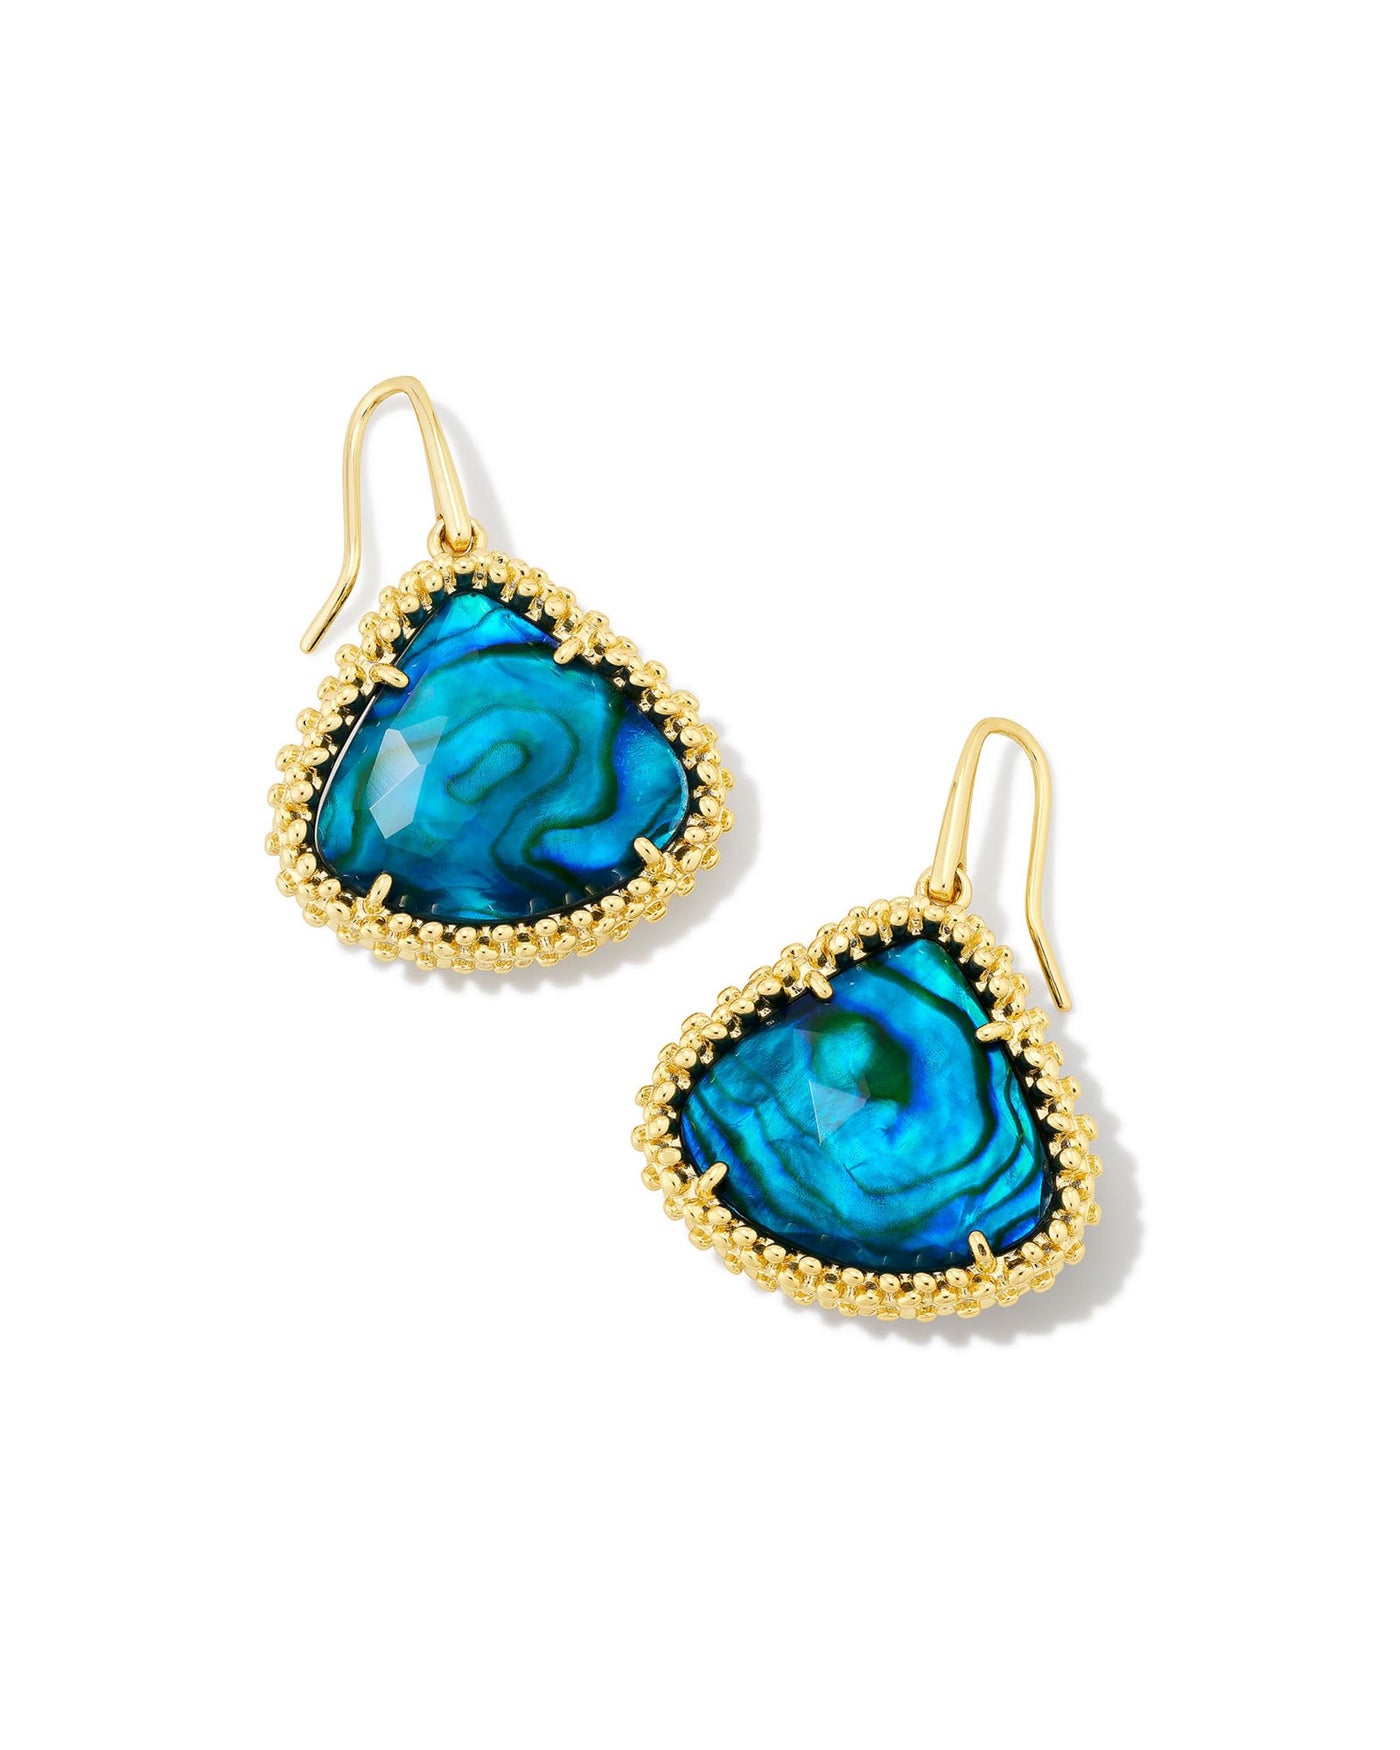 Gold Tone Earrings Featuring Teal Abalone by Kendra Scott